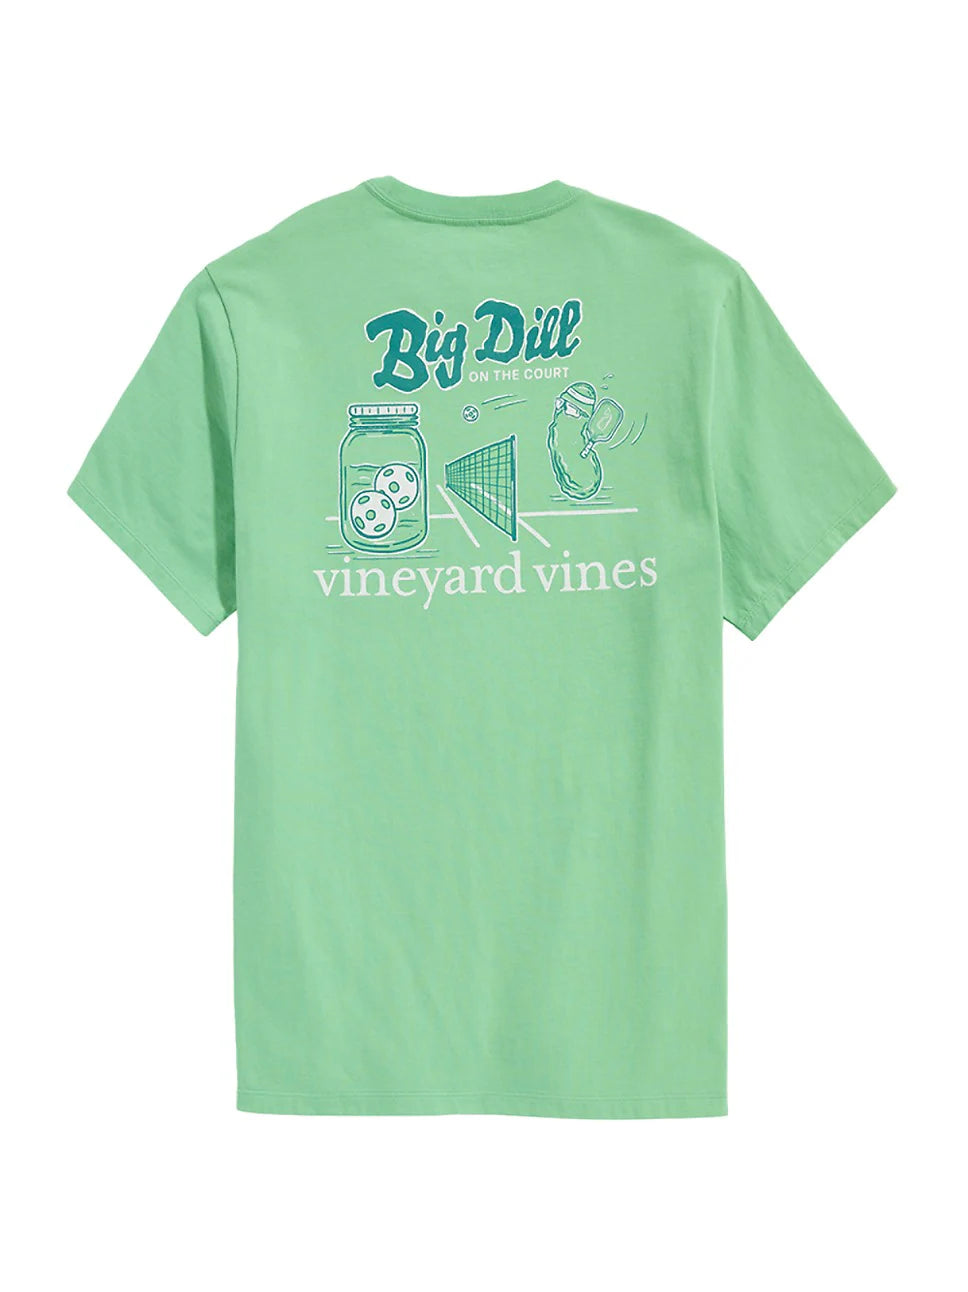 A Big Dill Short Sleeve Pocket Tee in the color green, from Vineyard Vines.